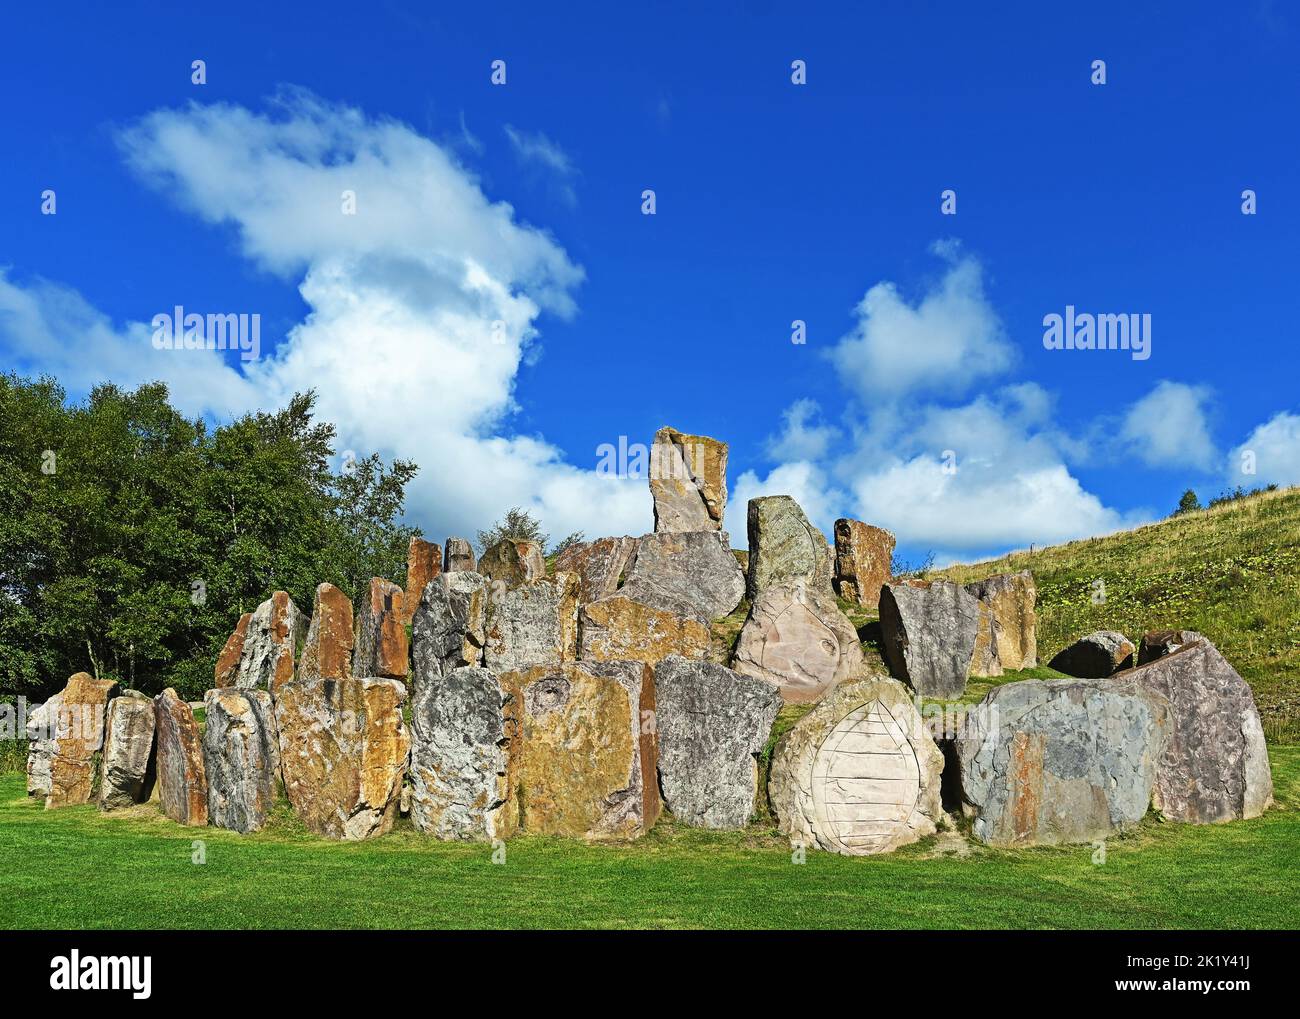 'Multiverse'. outdoor artwork by Charles Jencks. Crawick Multiverse, Sanquhar, Dumfries and Galloway, Scotland, United Kingdom, Europe. Stock Photo